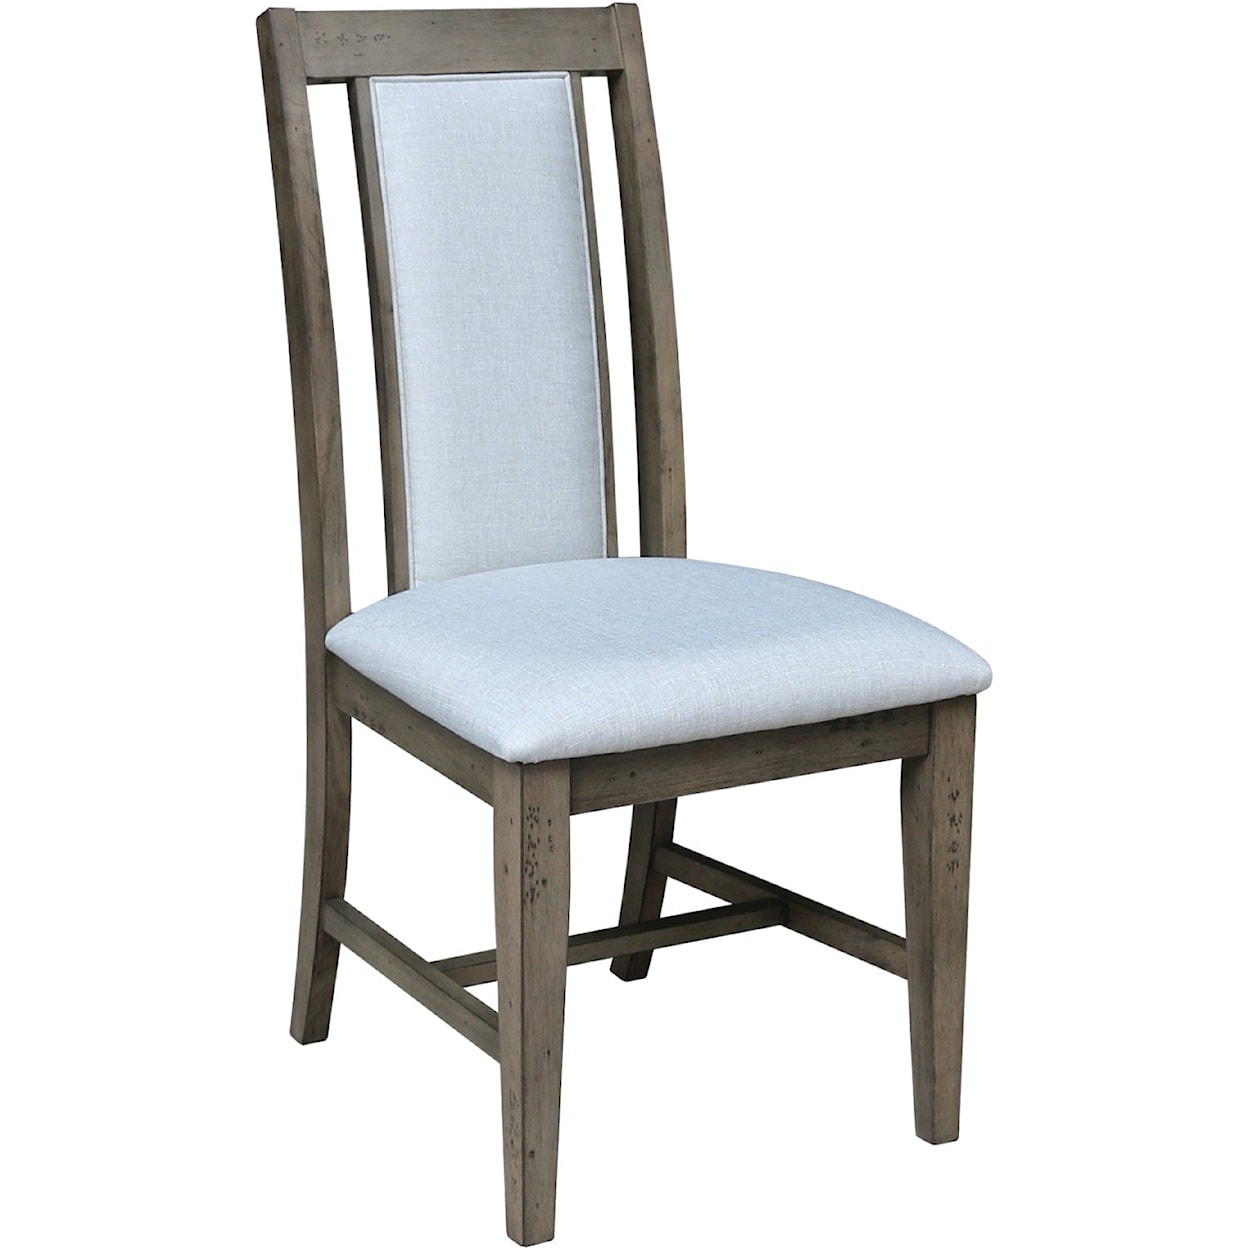 Carolina Dinette Farmhouse Chic Upholstered Dining Chair